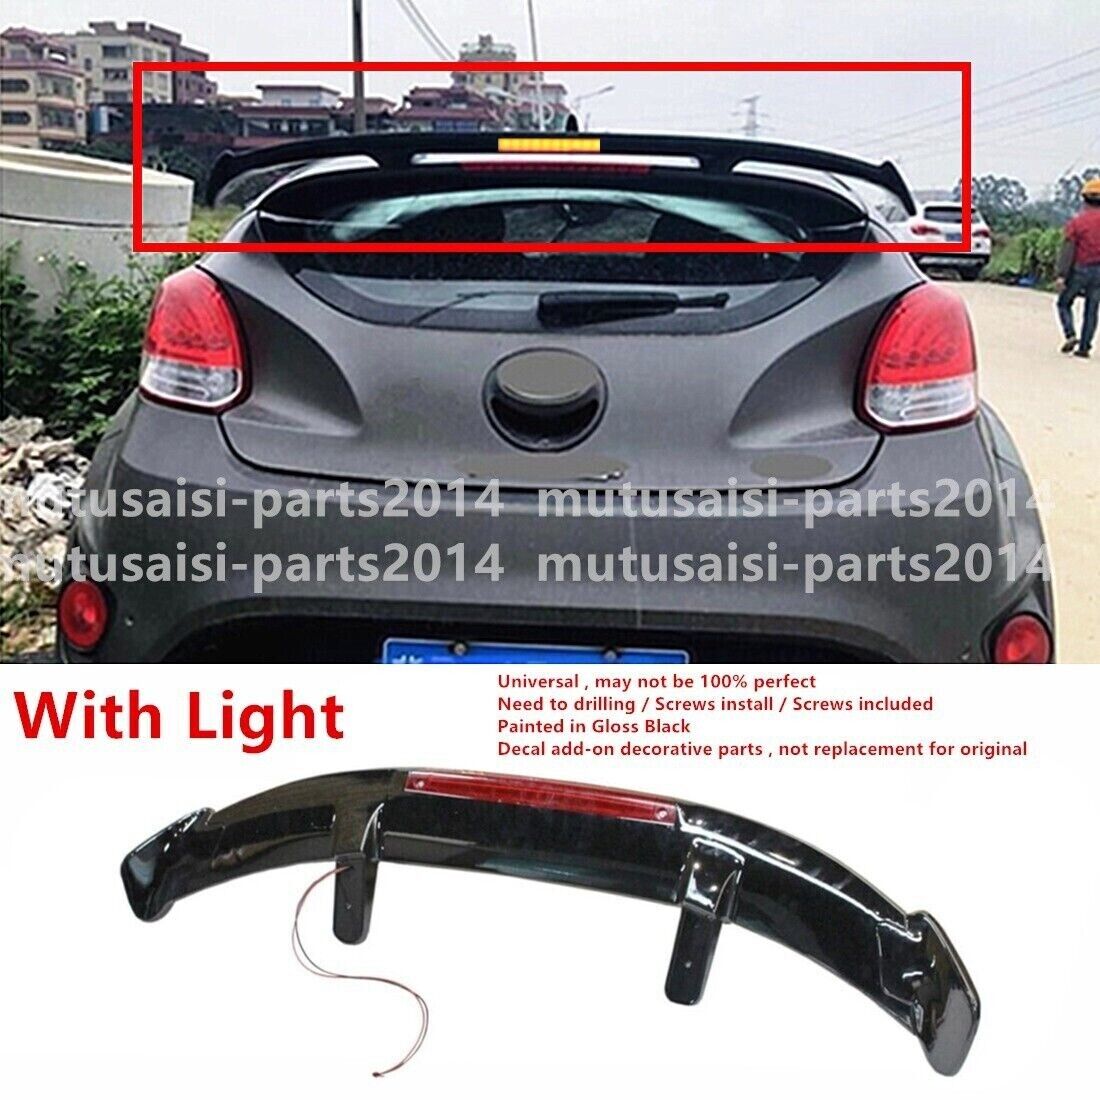 W/ LIGHT UNIVERSAL FITS 2012-2017 HYUNDAI VELOSTER REAR WINDOW ROOF SPOILER WING